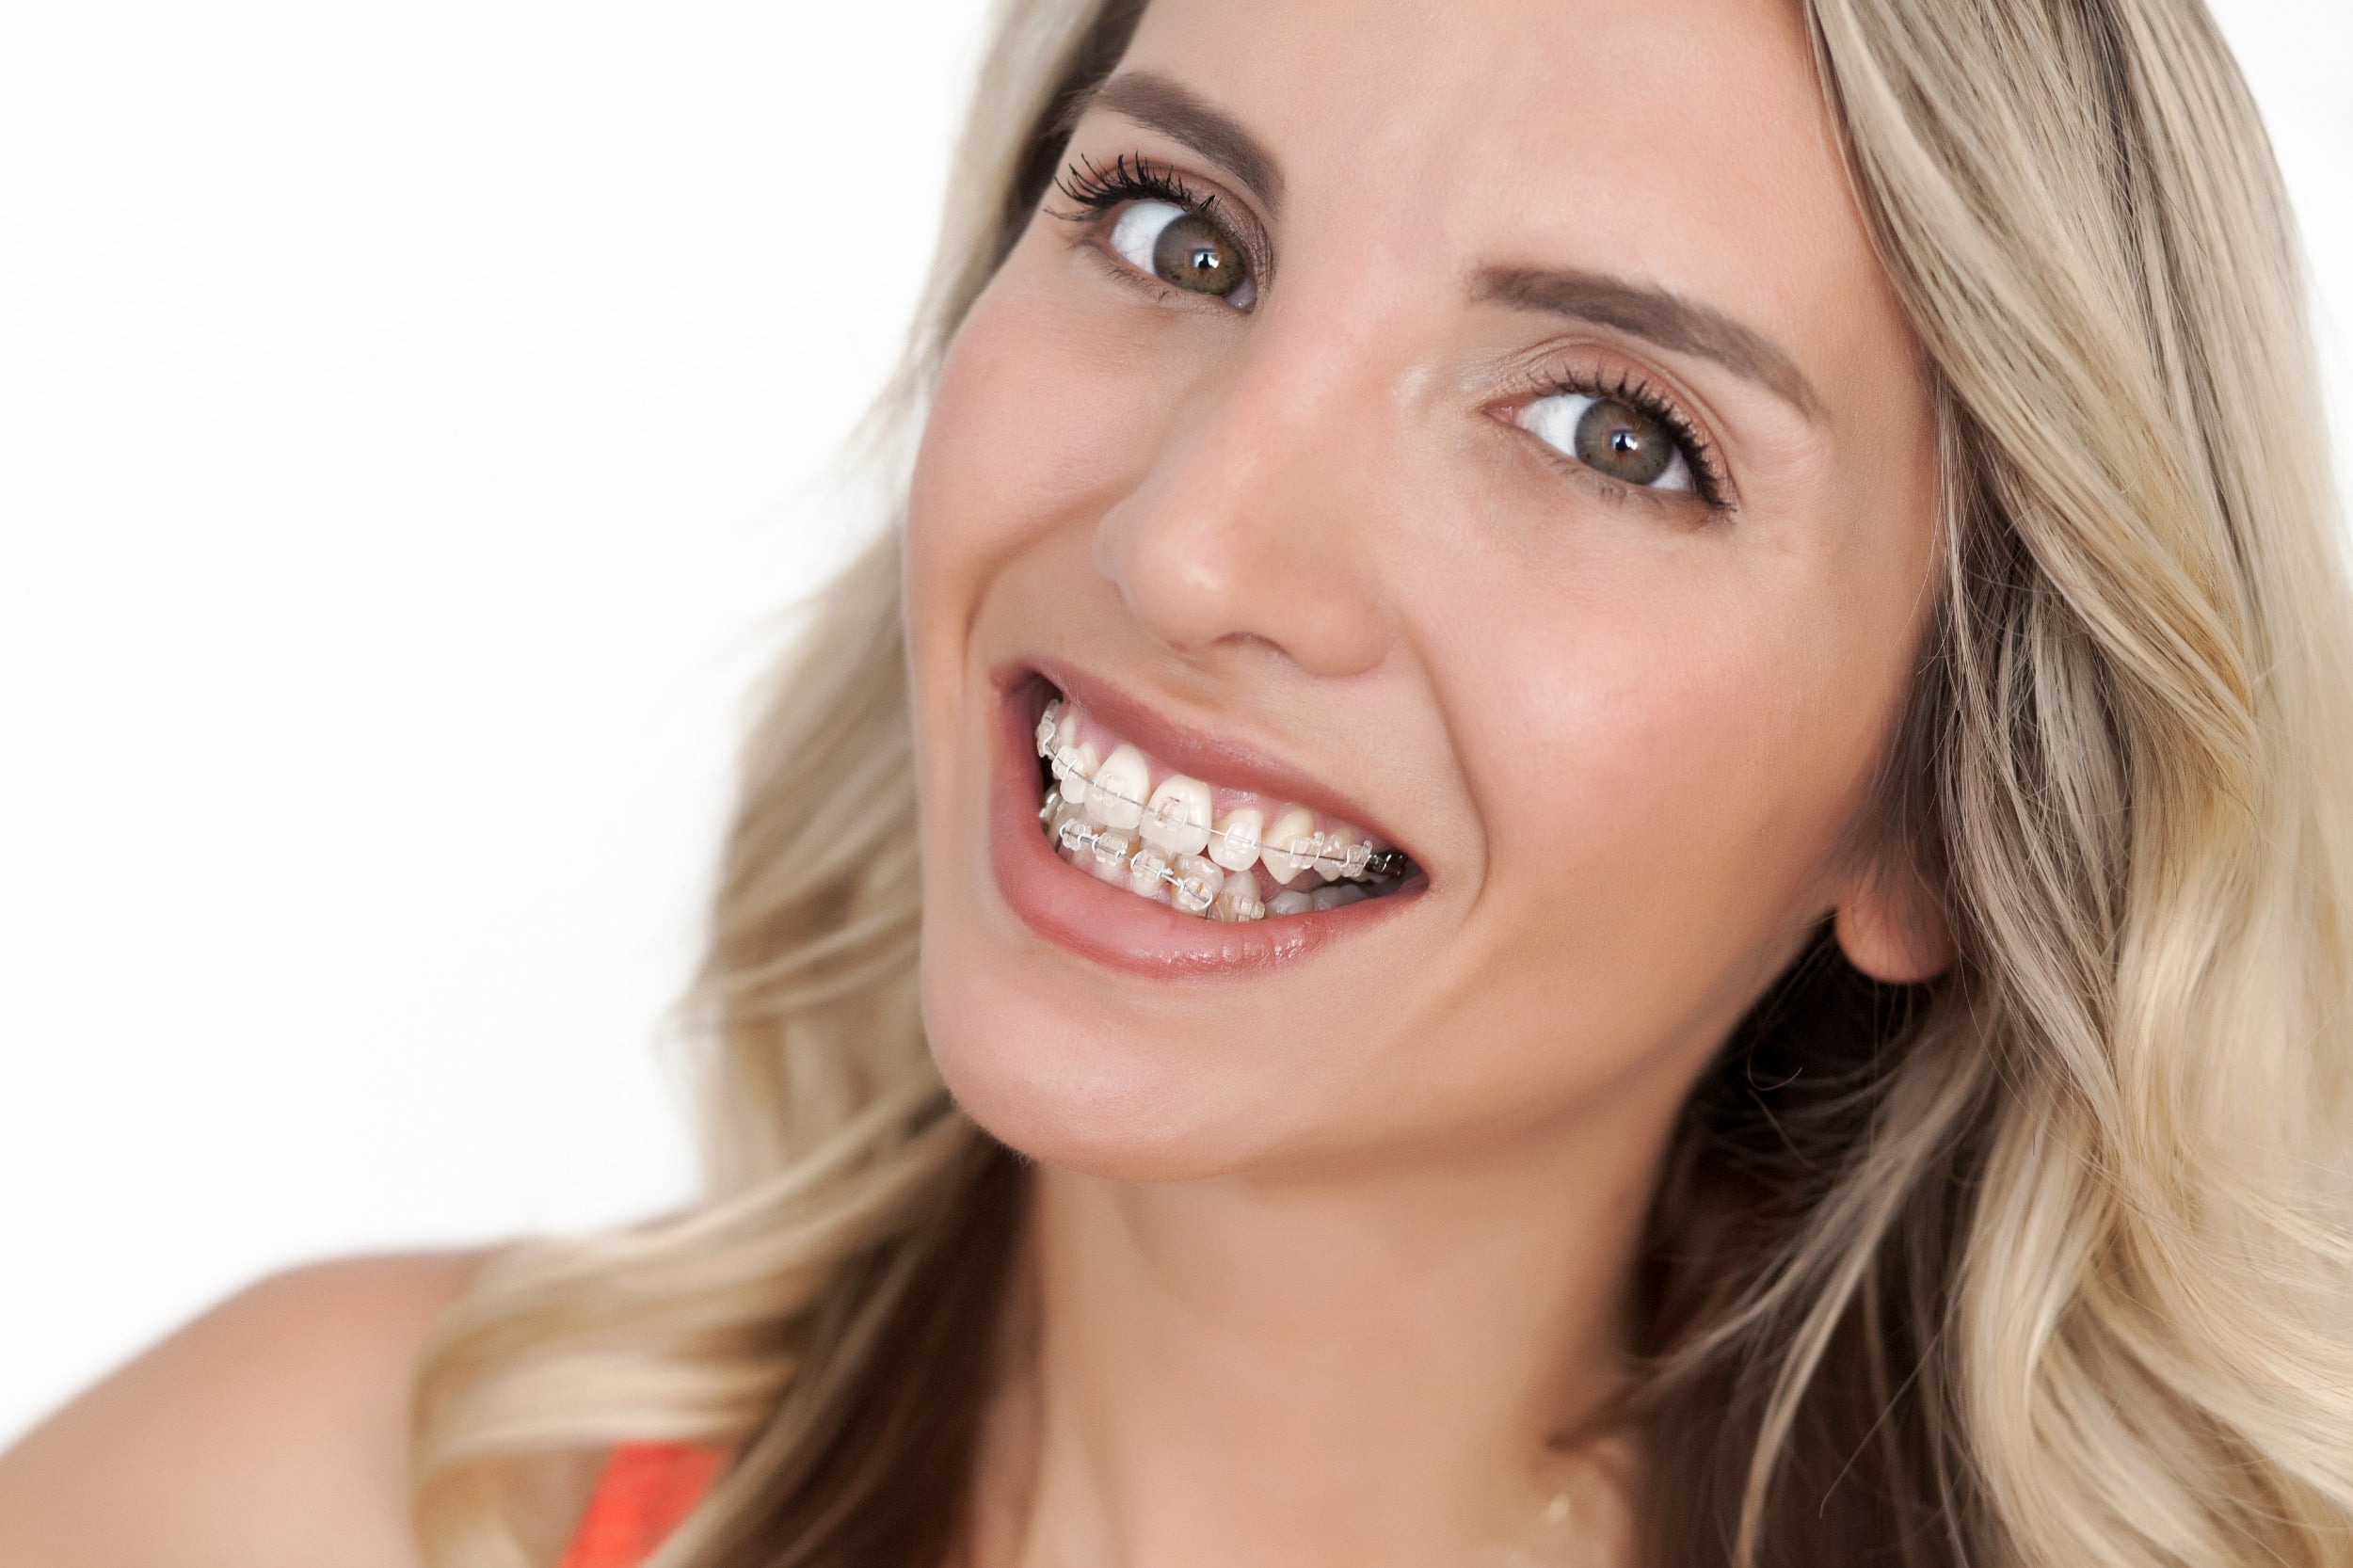 What Are Fast Braces & How They Work Fast to Straighten Teeth